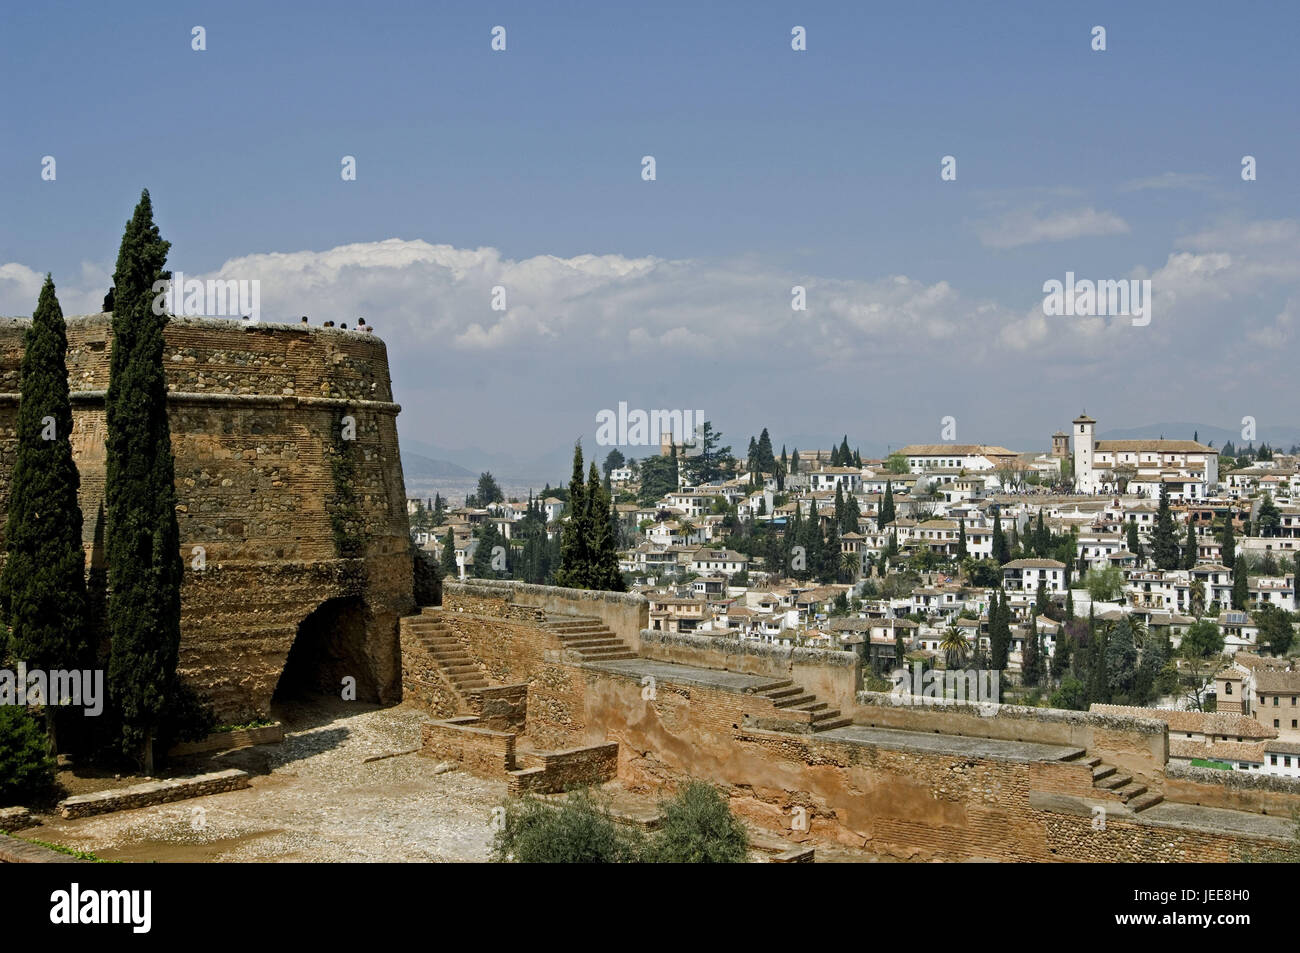 Location Alhambra, view, part of town of Albayzin, Granada, Andalusia, Spain, Stock Photo